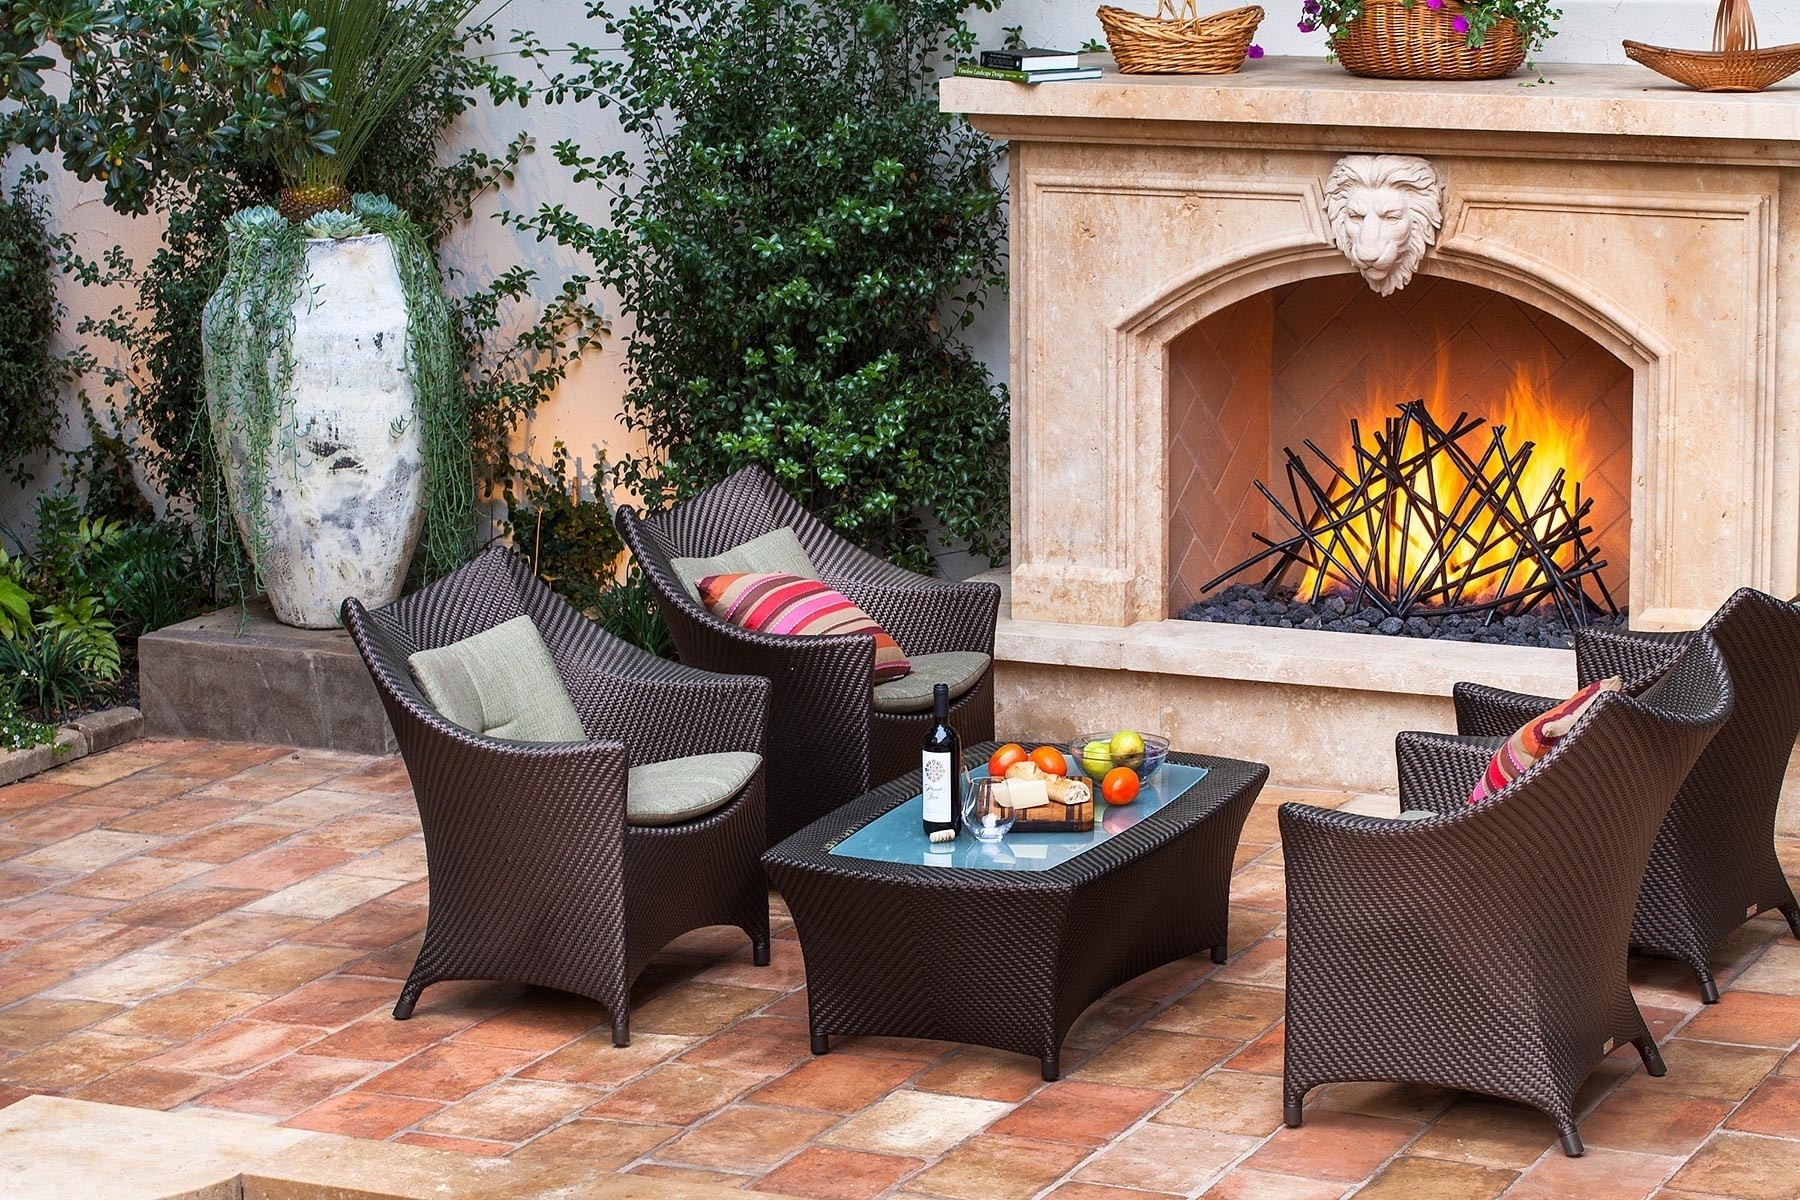 Large Clay Chiminea Outdoor Fireplace With Furniture